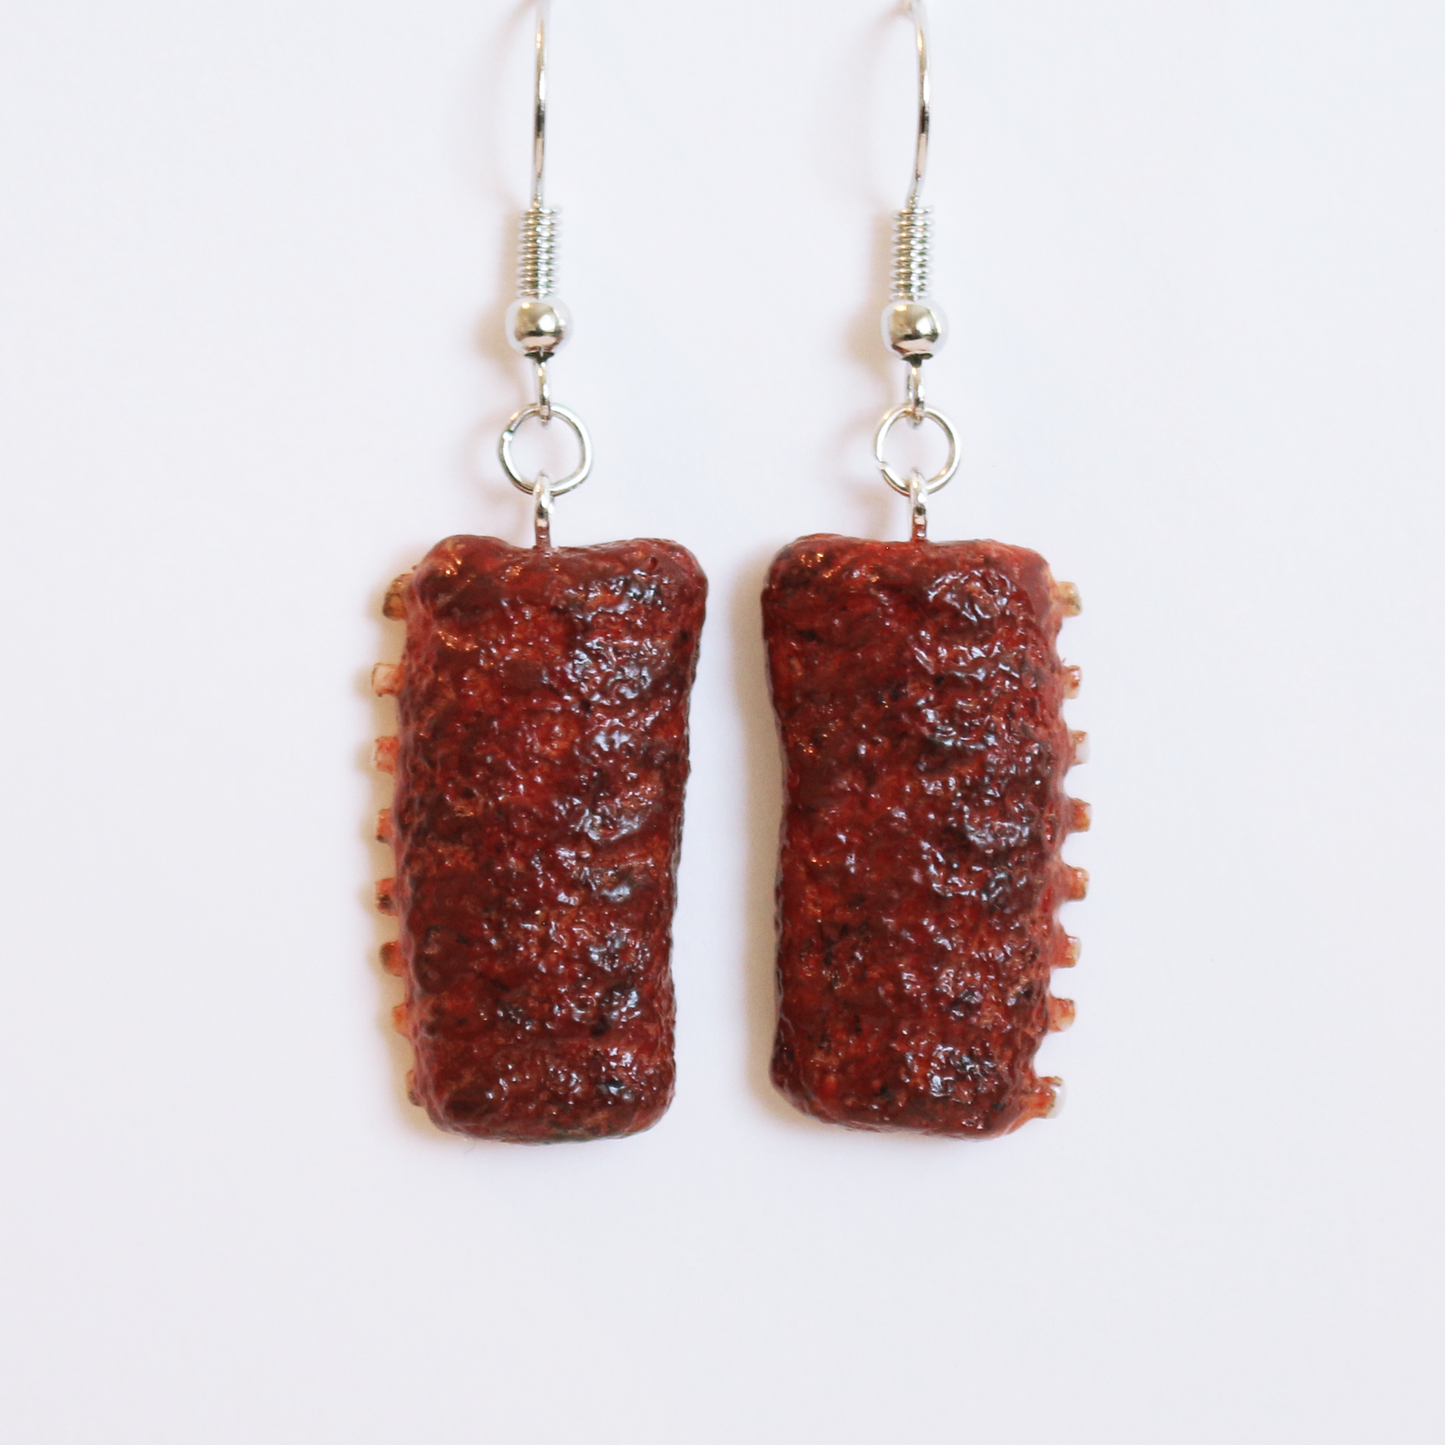 Rack of Ribs Earrings | Miniature Food Jewelry | For Any BBQ, Grill, or Smoke Enthusiast | S'Berry Boutique